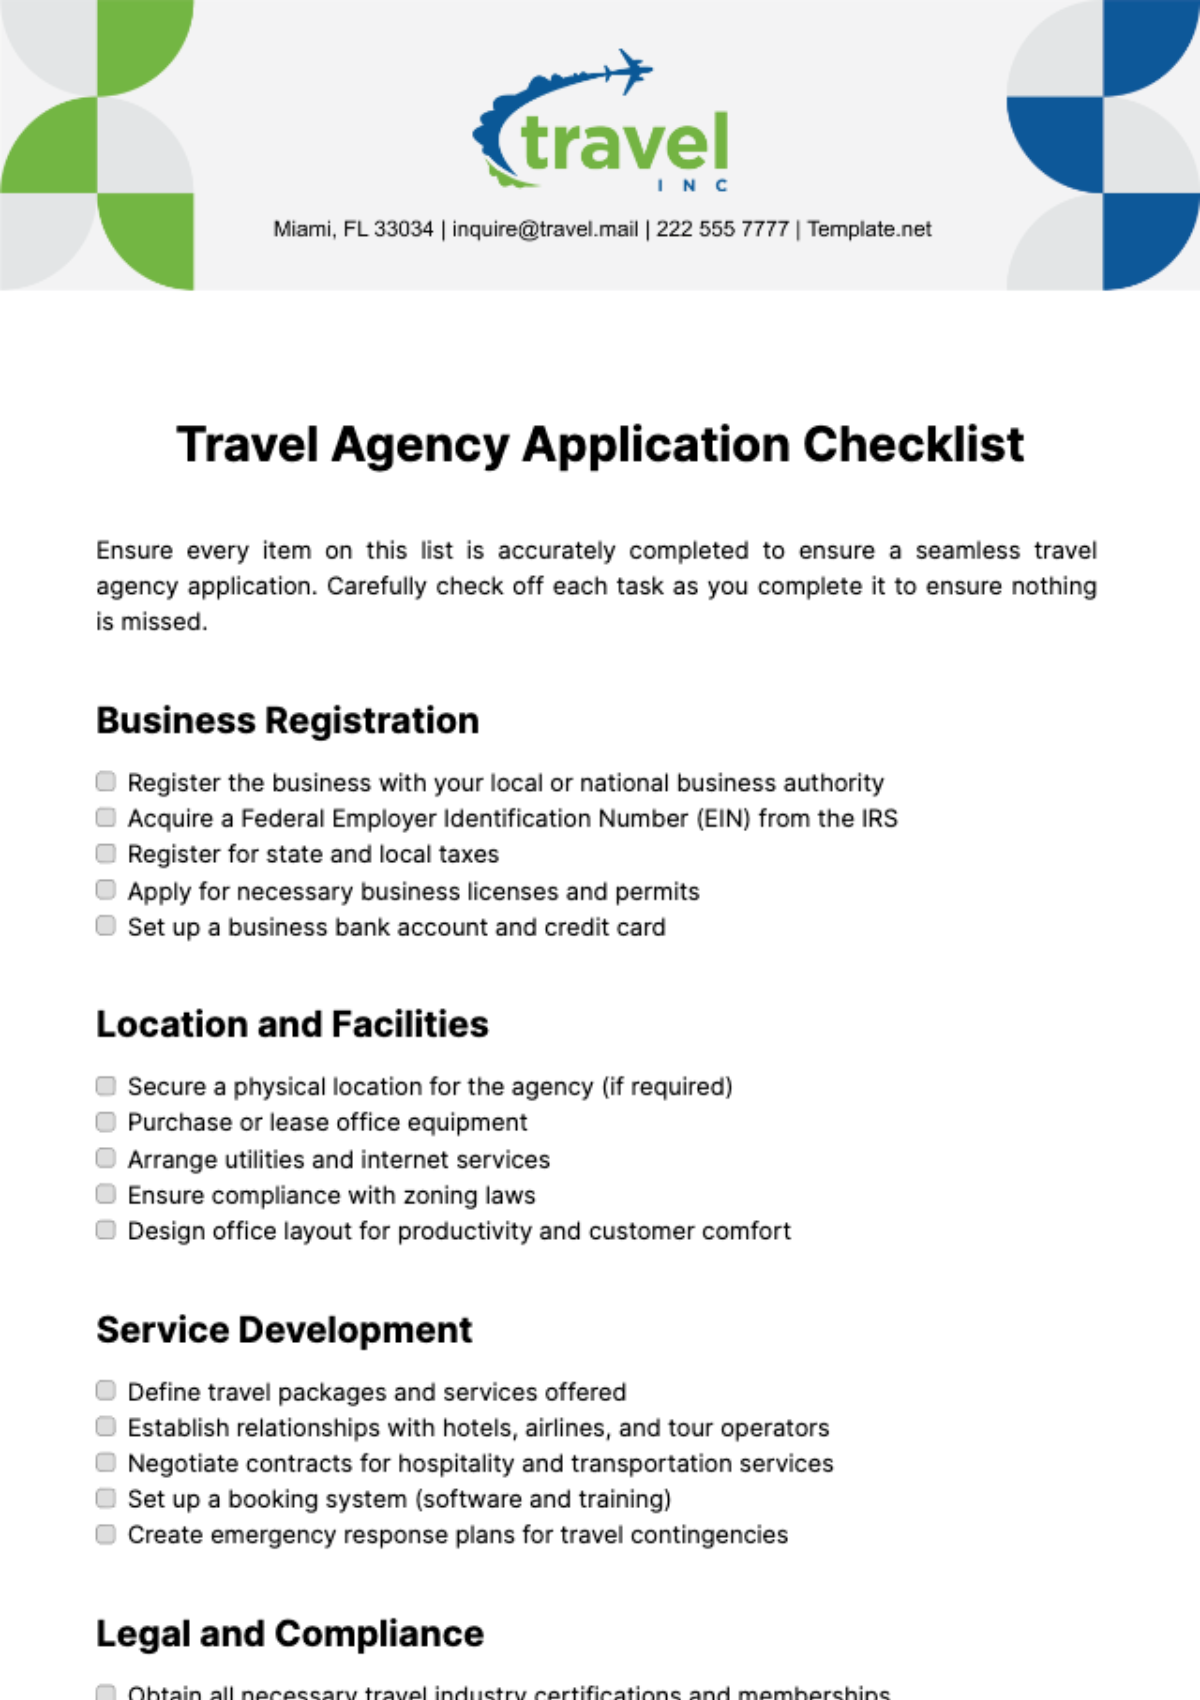 Free Travel Agency Application Checklist Template